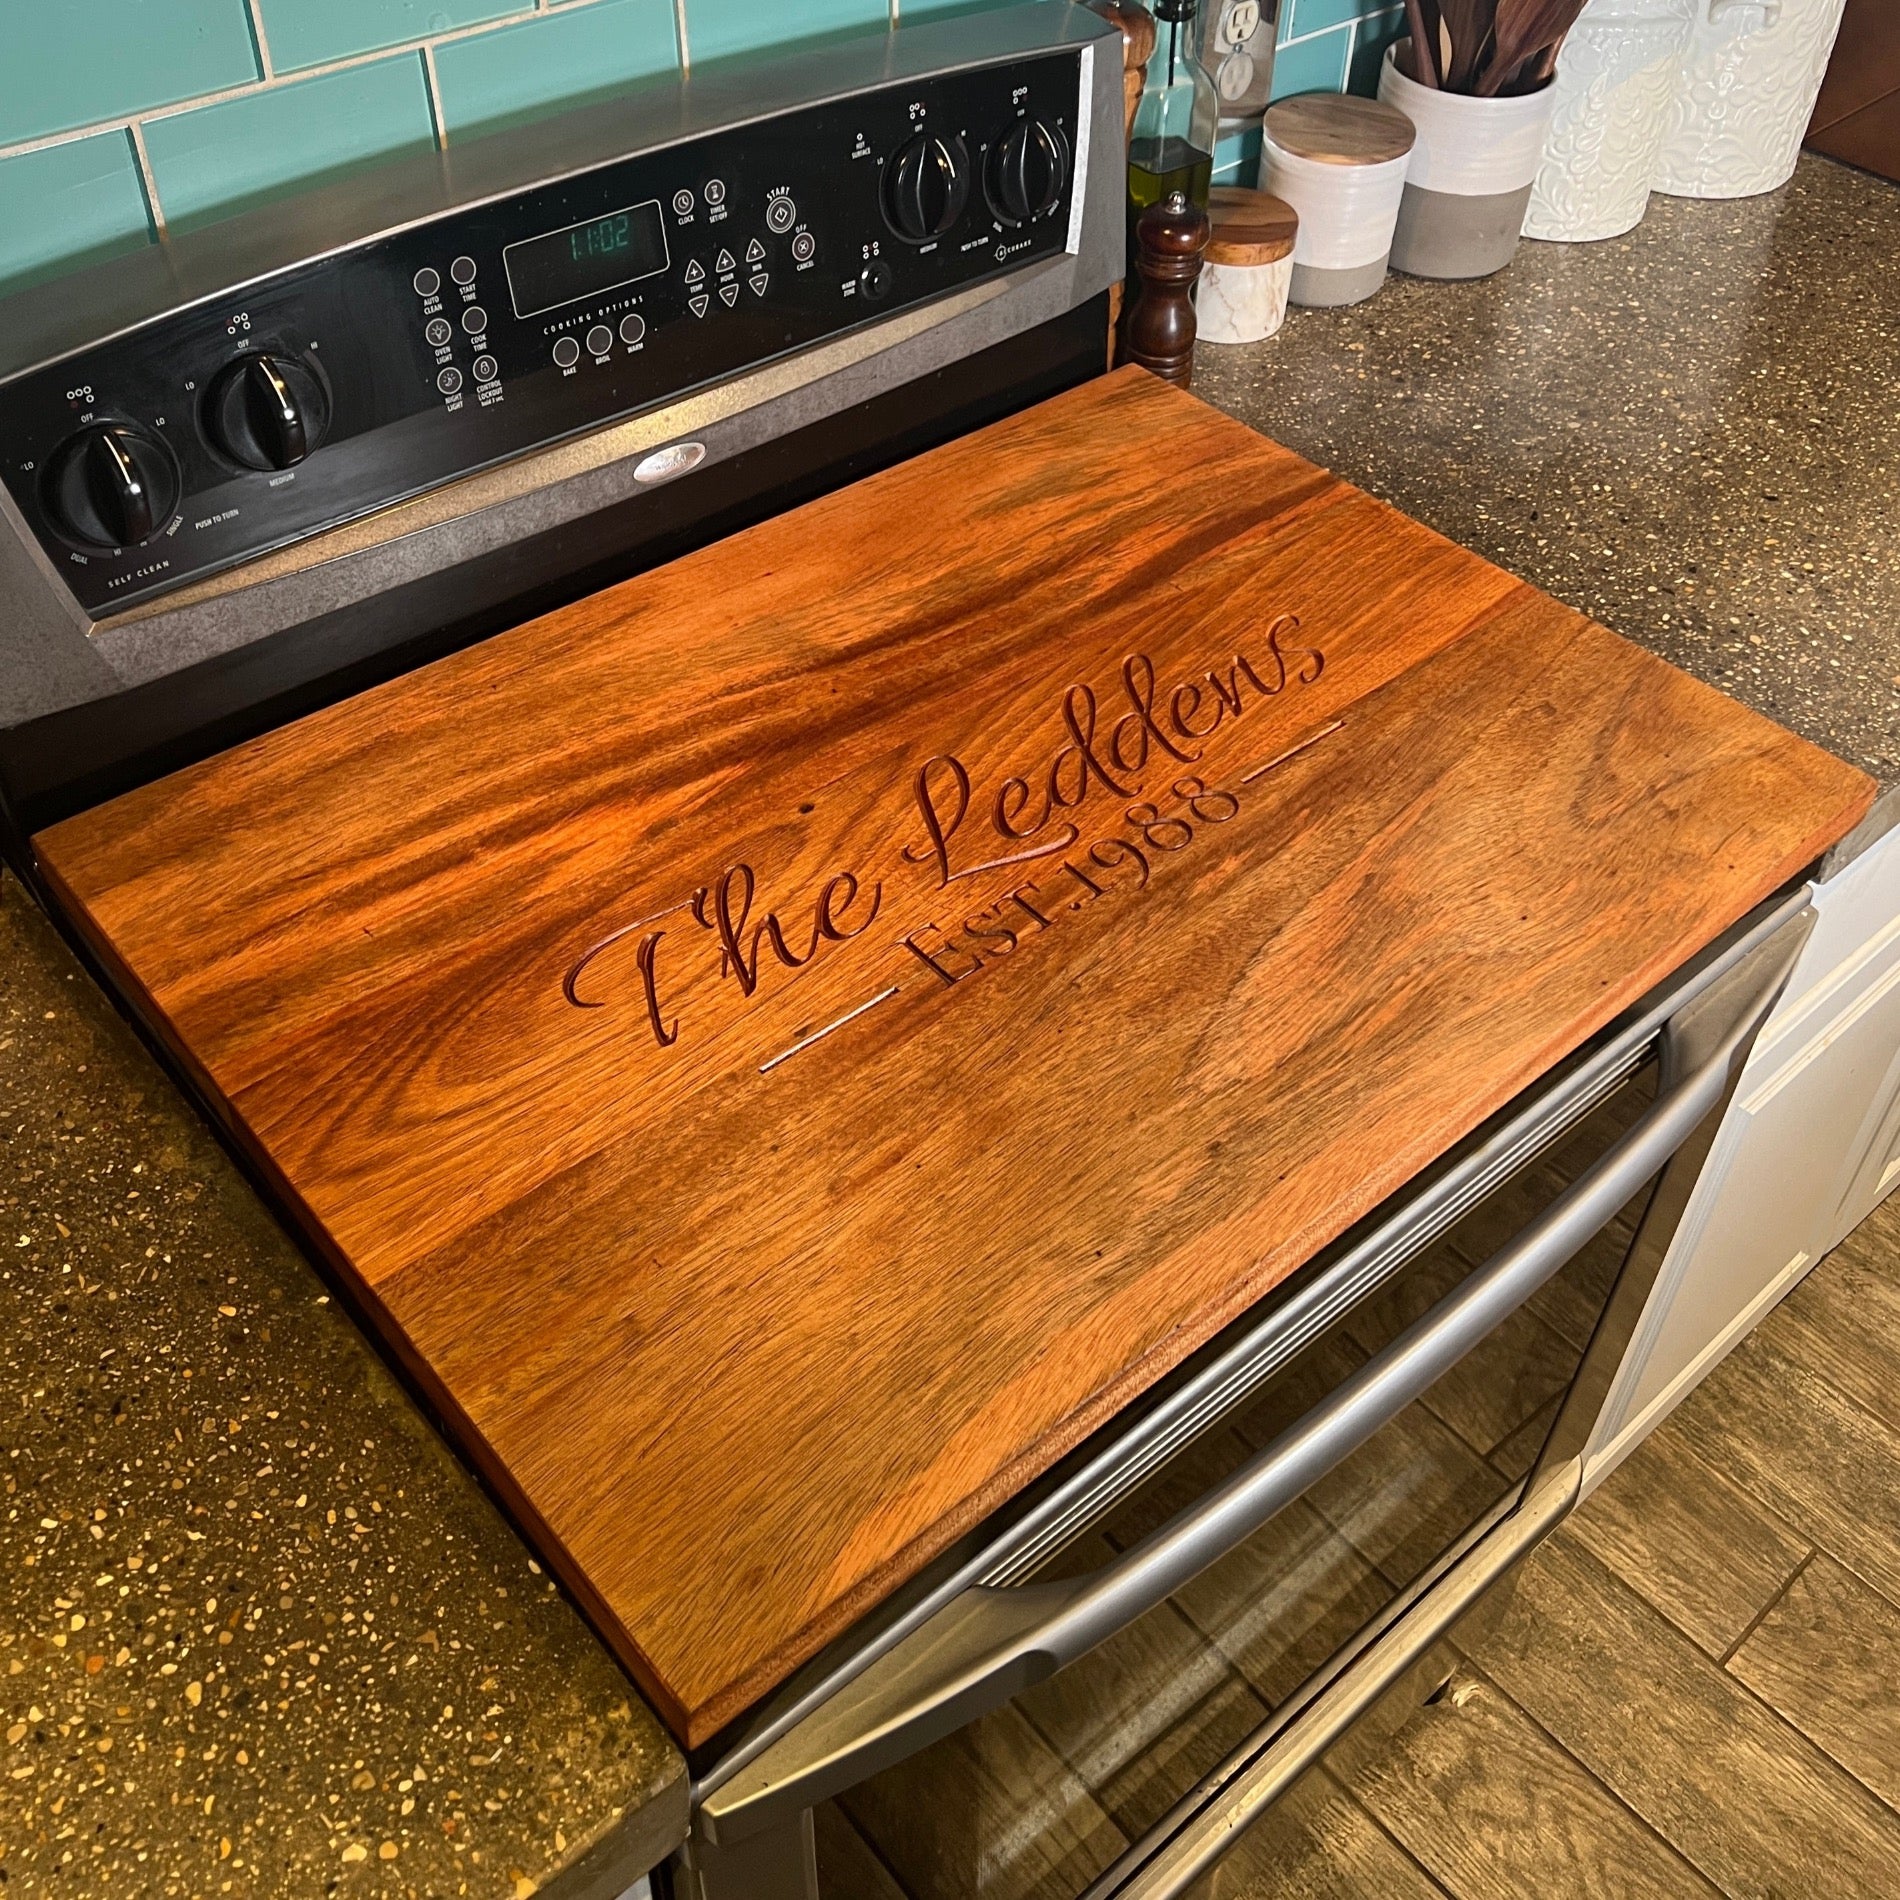 Mahogany Noodle Board - Stovetop Cover - Cutting Board - Food Safe Ser